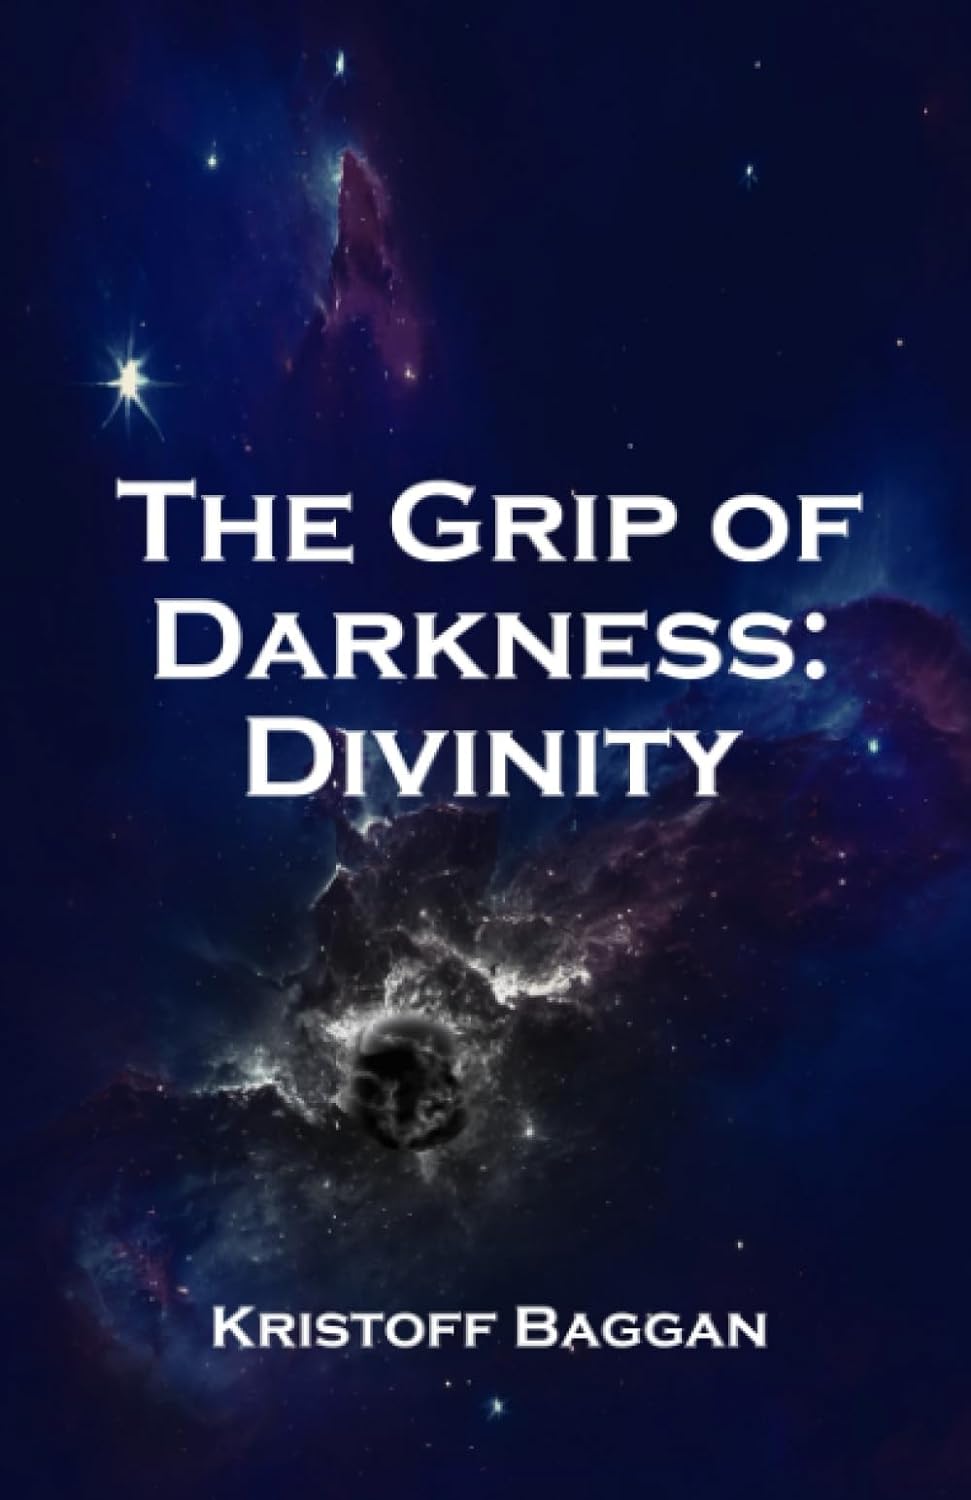 The Grip of Darkness: Divinity by Kristoff Baggan